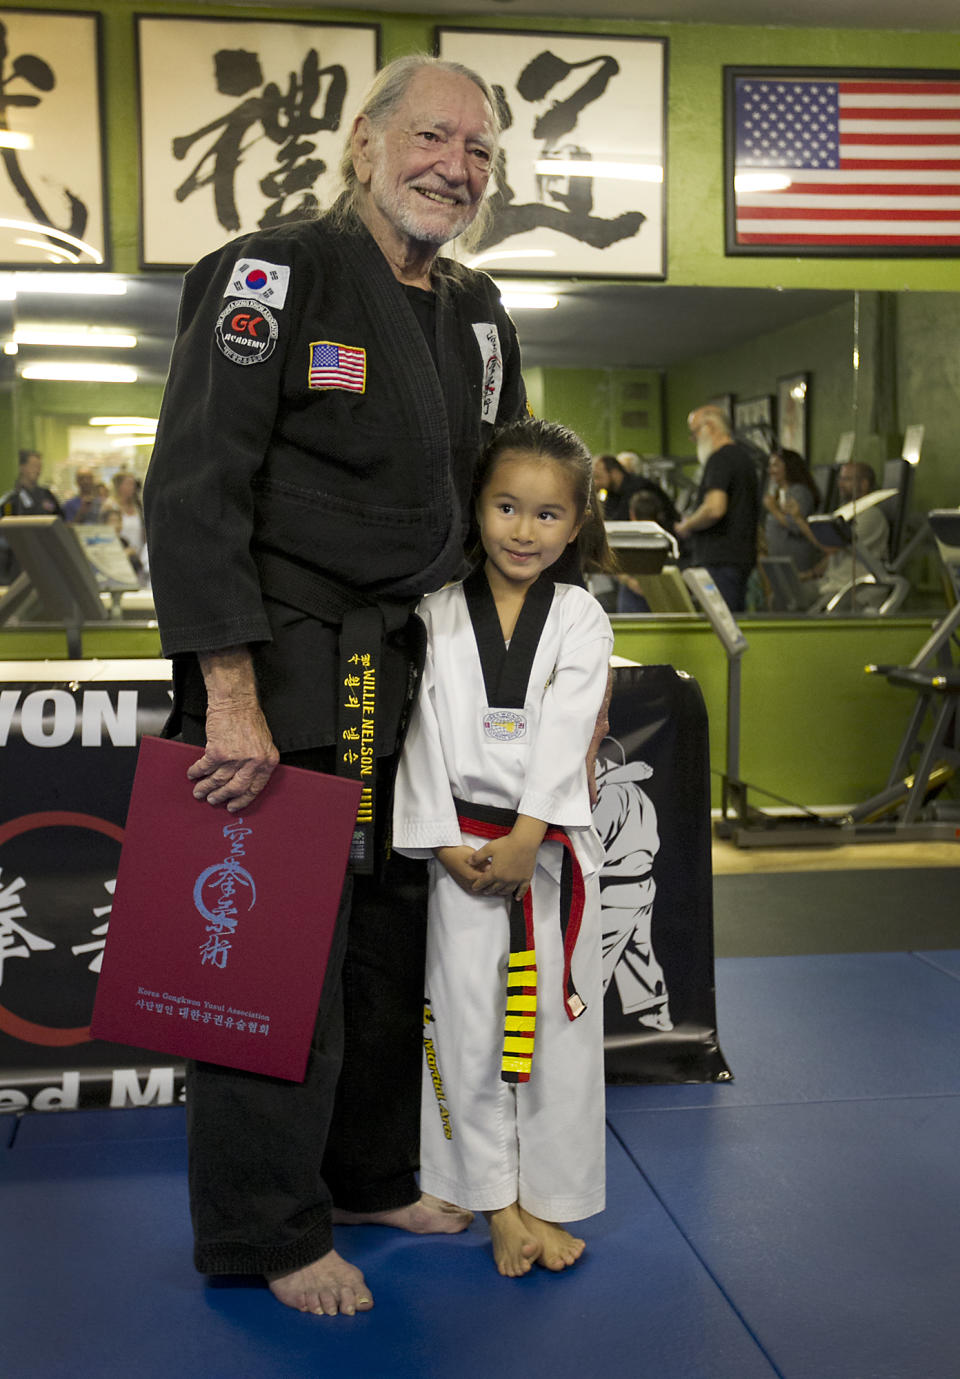 Willie Nelson, the country music icon who turns 81 this week, poses with Reese Park, 5, one of the youngest pupils of Sam Um, as he receives his fifth-degree black belt in the martial art of Gong Kwon Yu Sul on Monday, April 28, 2014, in Austin, Texas. (AP Photo/Austin American-Statesman, Ralph Barrera) AUSTIN CHRONICLE OUT, COMMUNITY IMPACT OUT, INTERNET AND TV MUST CREDIT PHOTOGRAPHER AND STATESMAN.COM, MAGS OUT